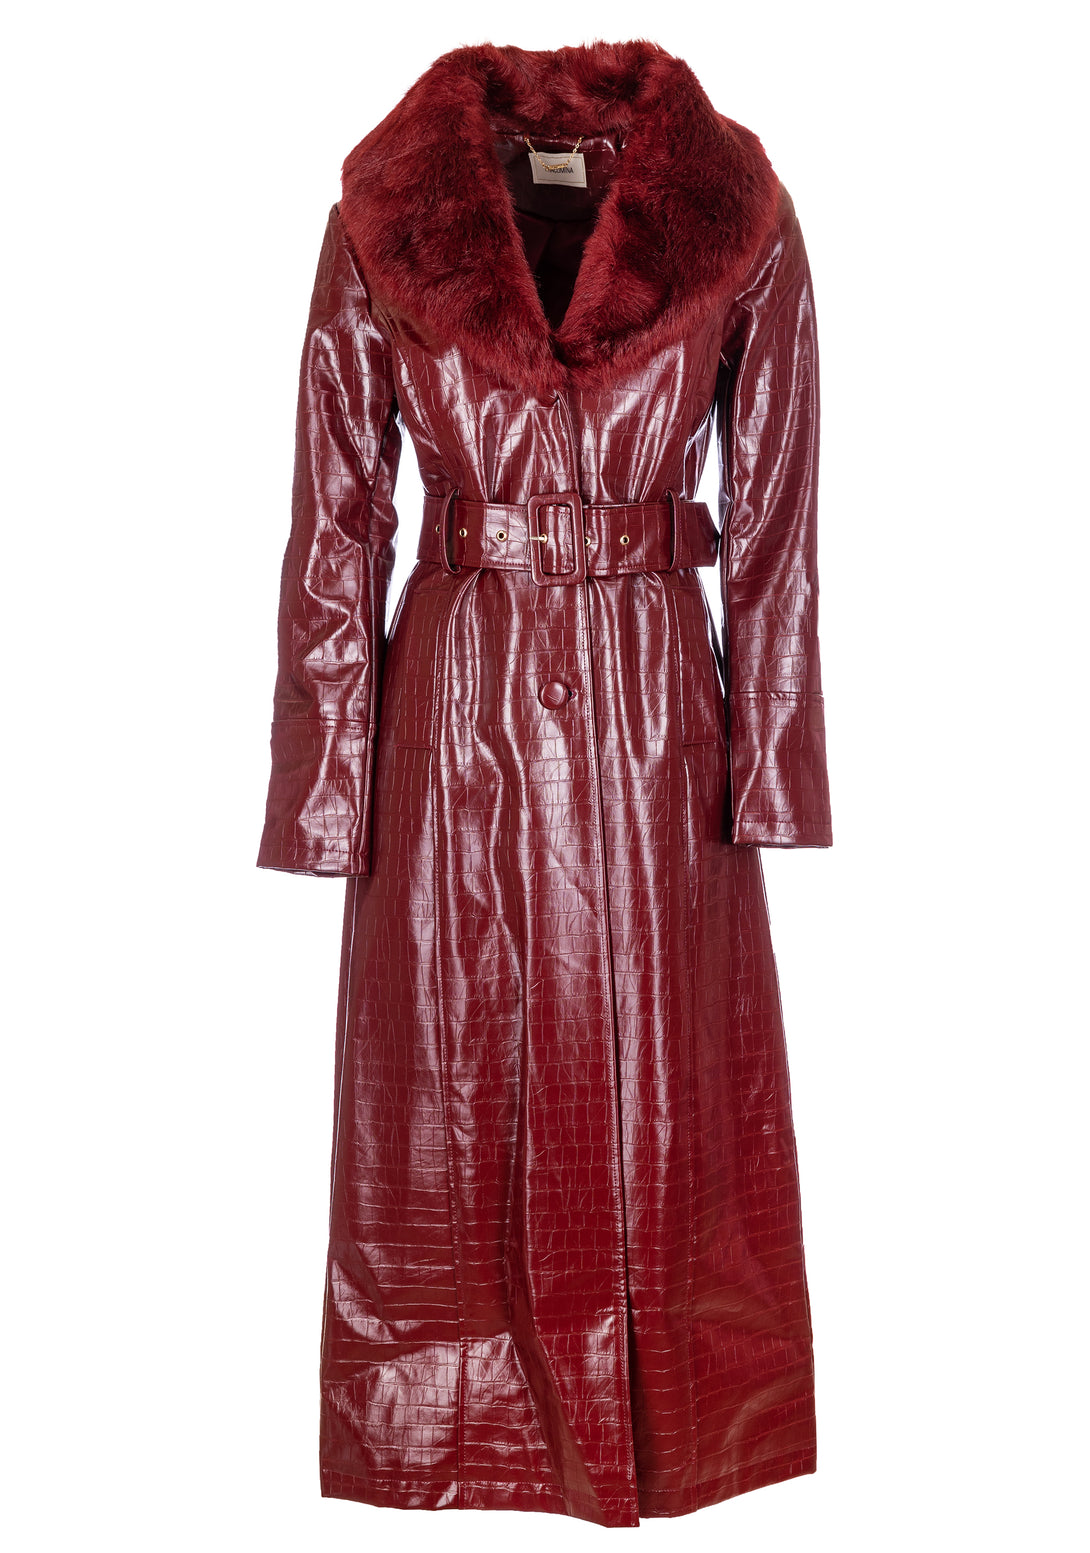 Long coat regular fit made in eco leather with croco print